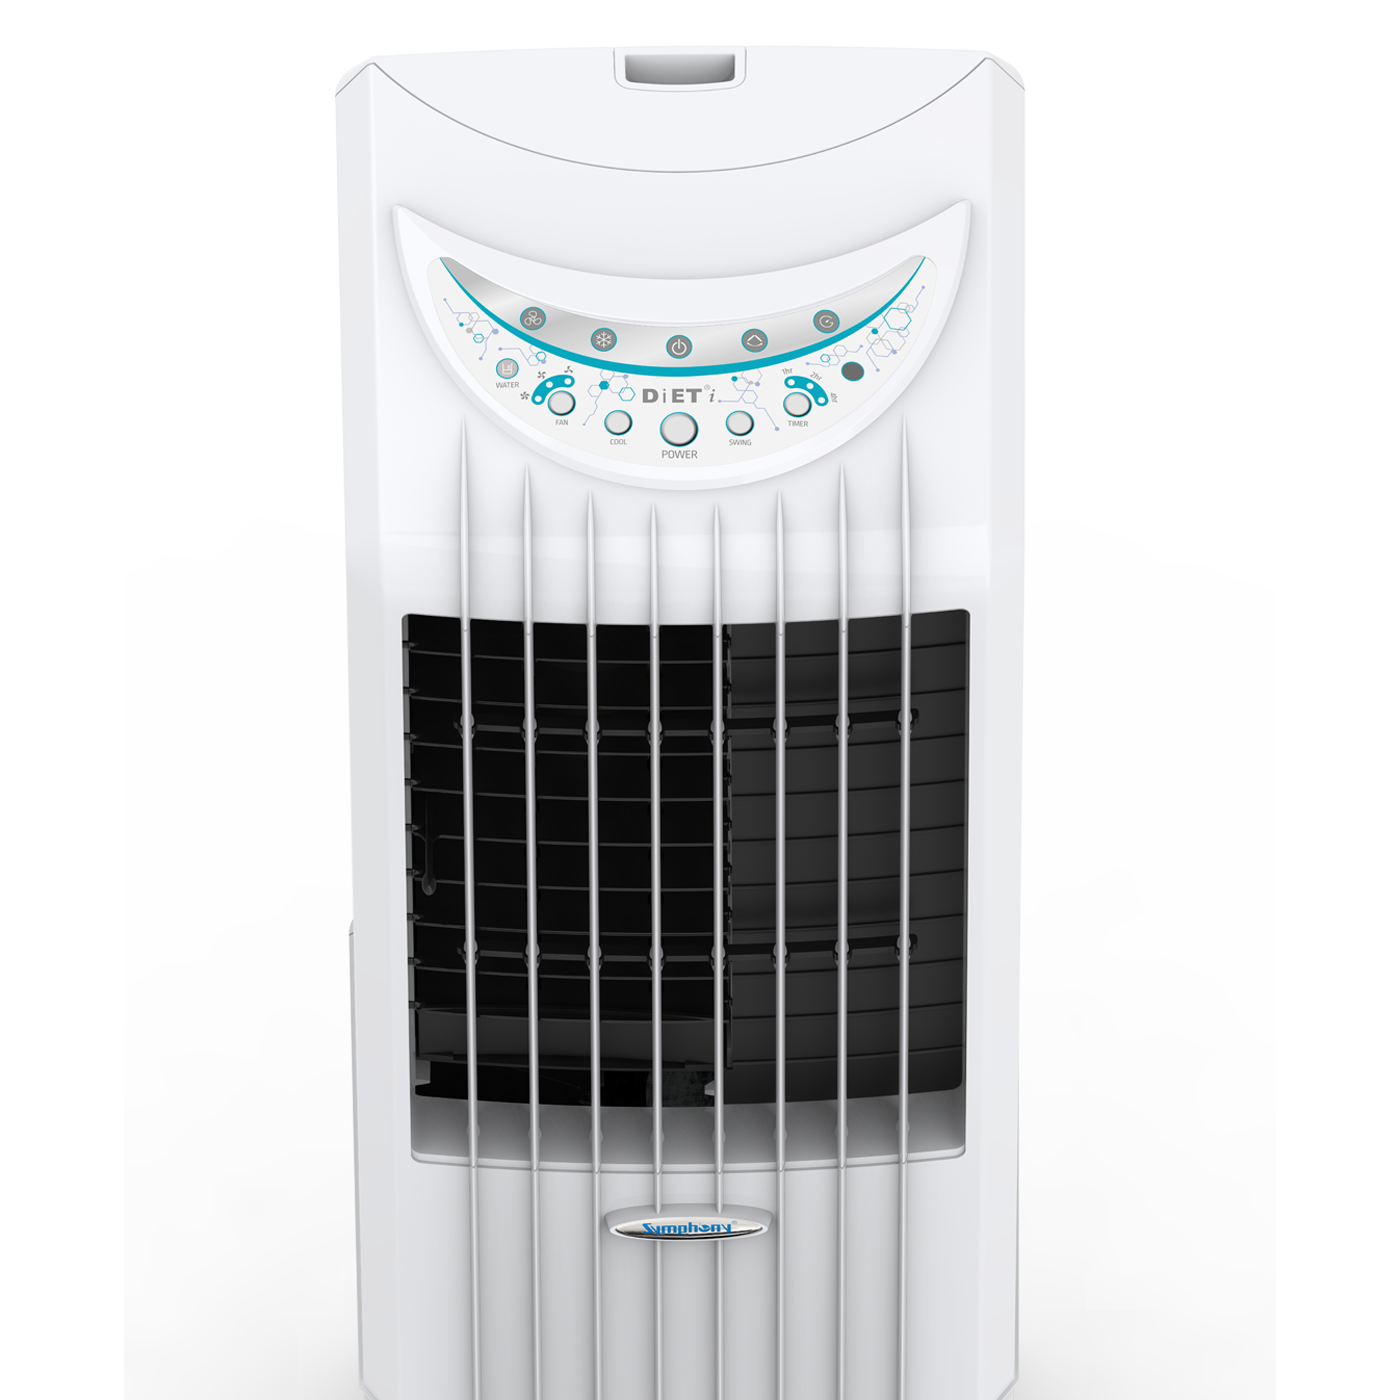 Best Personal Tower Air Cooler Diet 22i with Powerful Air Blower